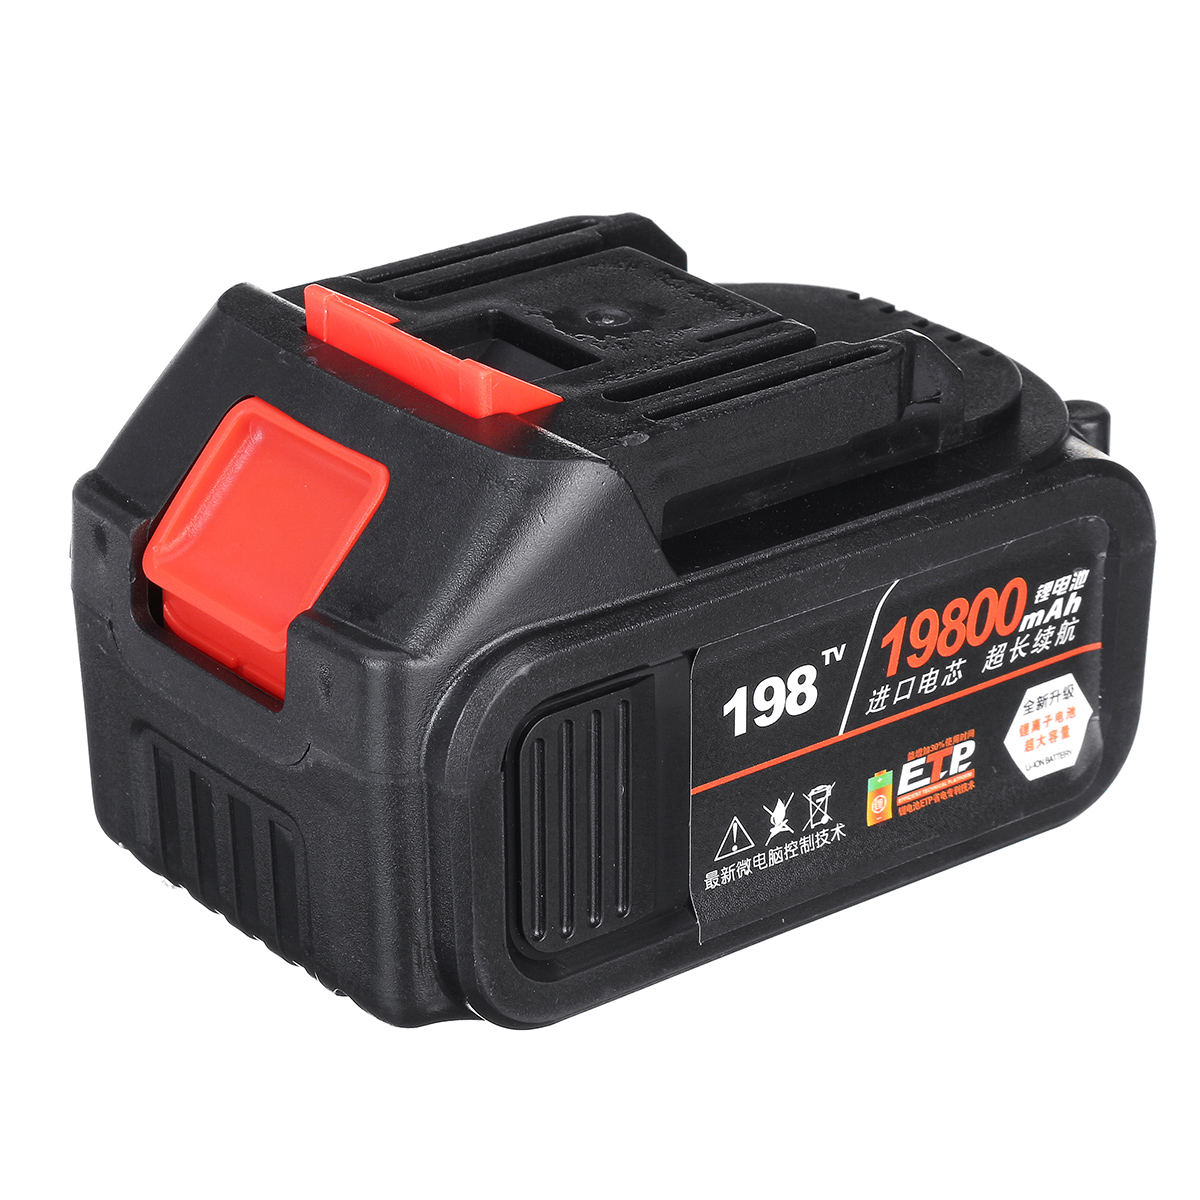 19800mAh-Lithium-Battery-Wrench-Multifunctional-300Nm-Electric-Cordless-Impact-Wrench-1449387-8